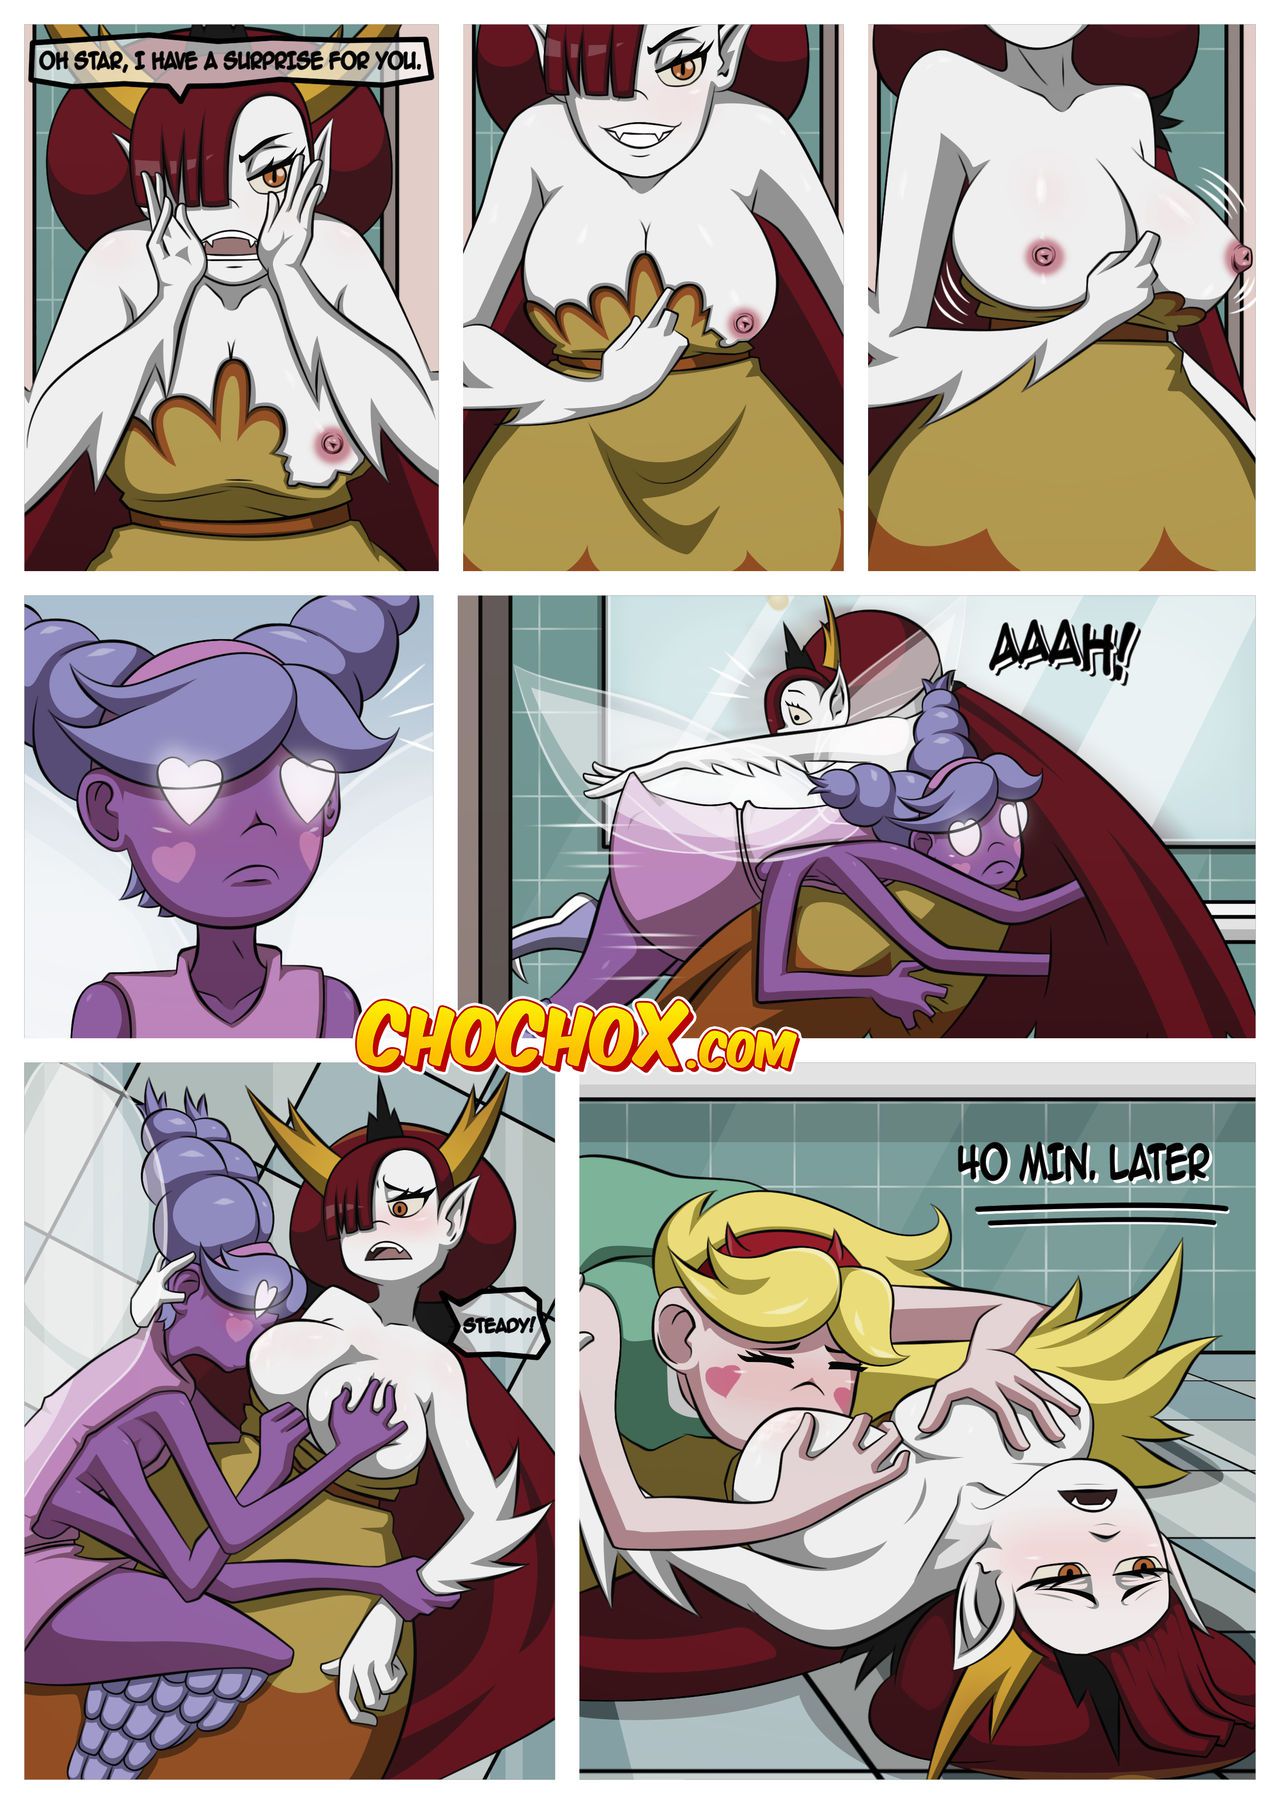 [Crock Comix] Hekapoo Plan’s - Sexberty 1 [ChoChoX] (Star Vs. The Forces of Evil) 9